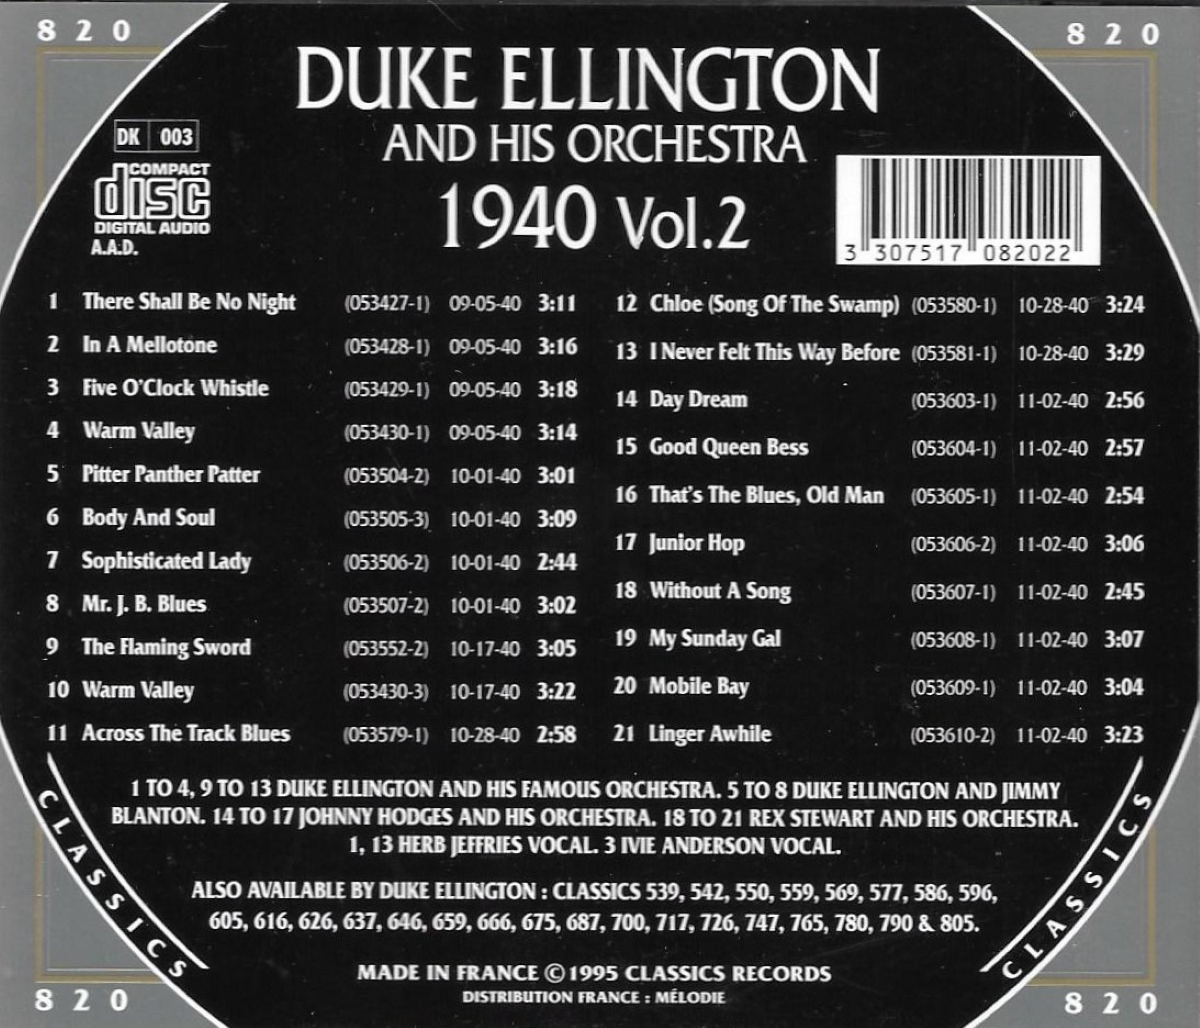 The Chronological Duke Ellington and His Orchestra-1940, Vol. 2